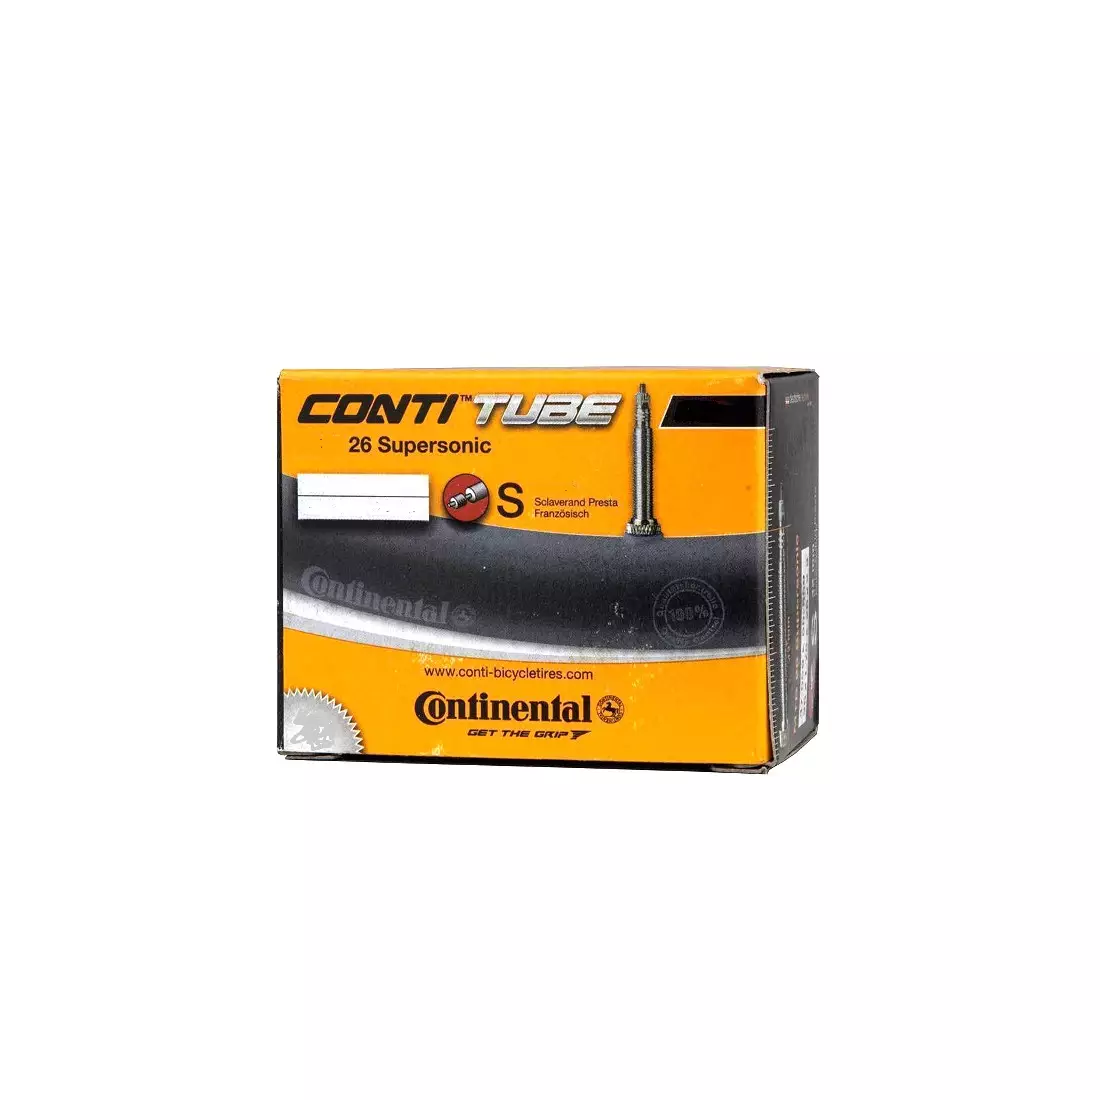 CONTINENTAL SS18 bicycle inner tube Race 26 Supersonic presta 60mm 18/25-559/571 26x1 650x18/25c